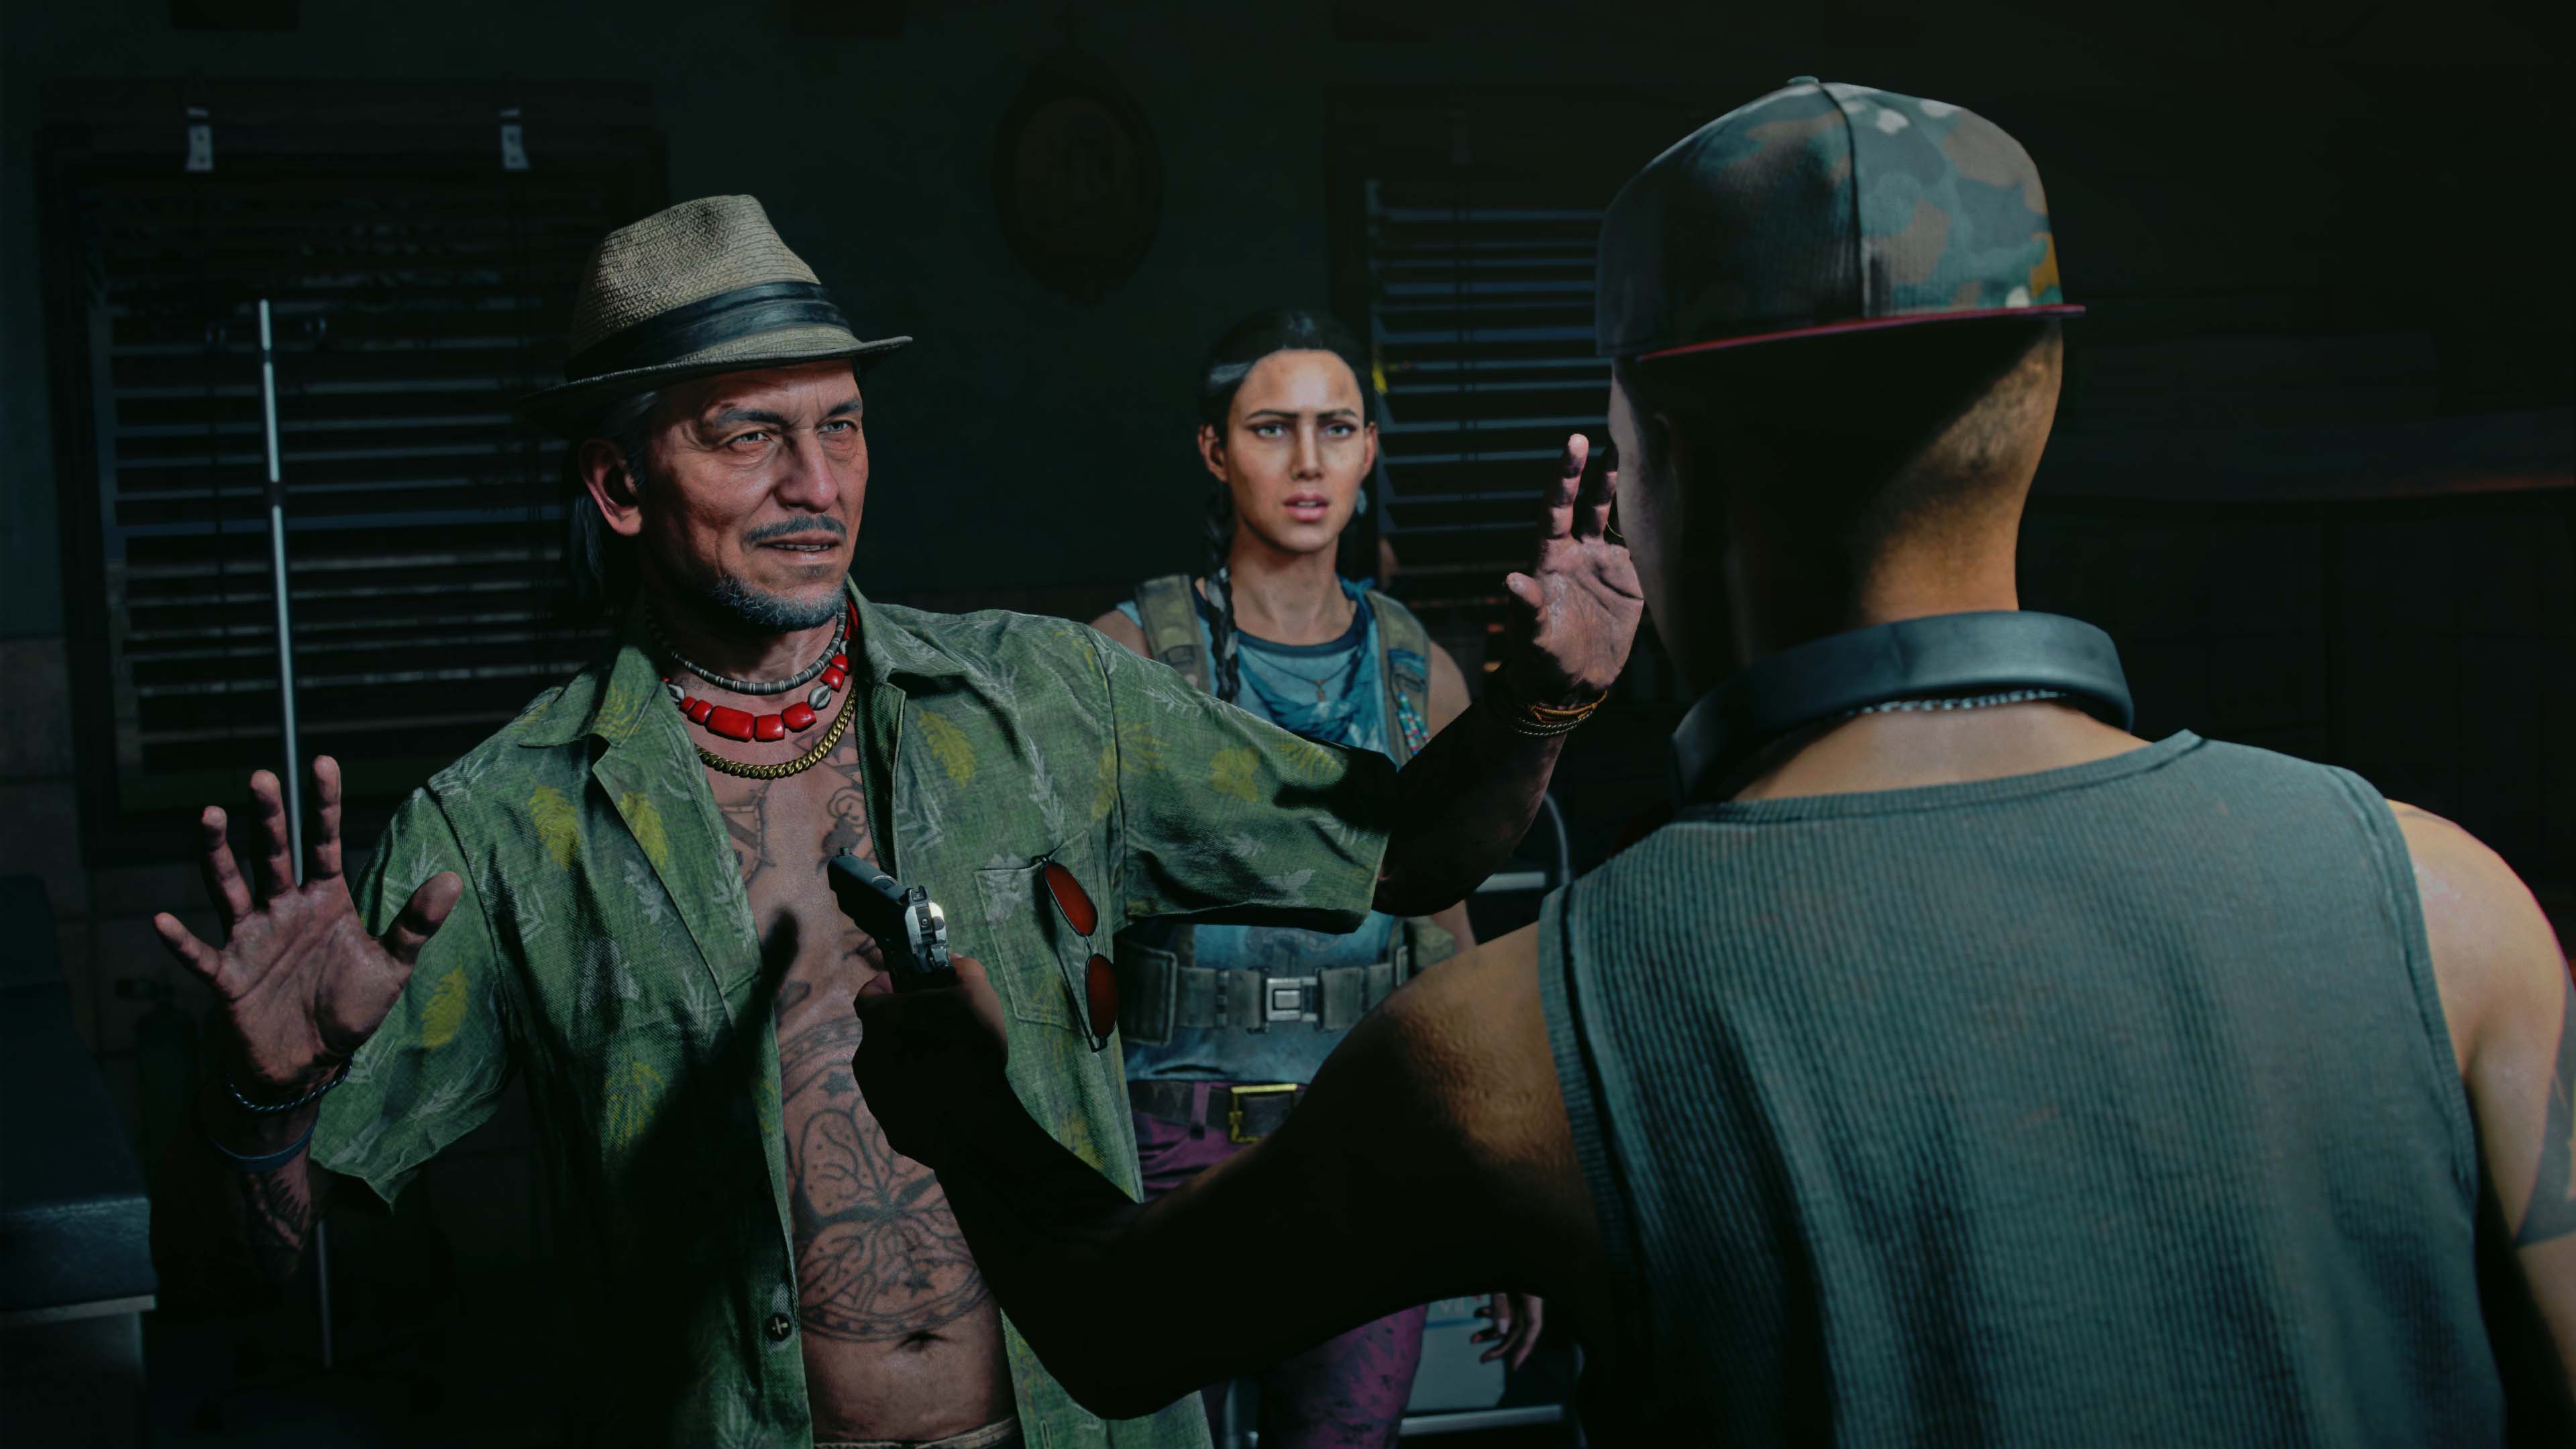 Information about the Far Cry 6 free trial